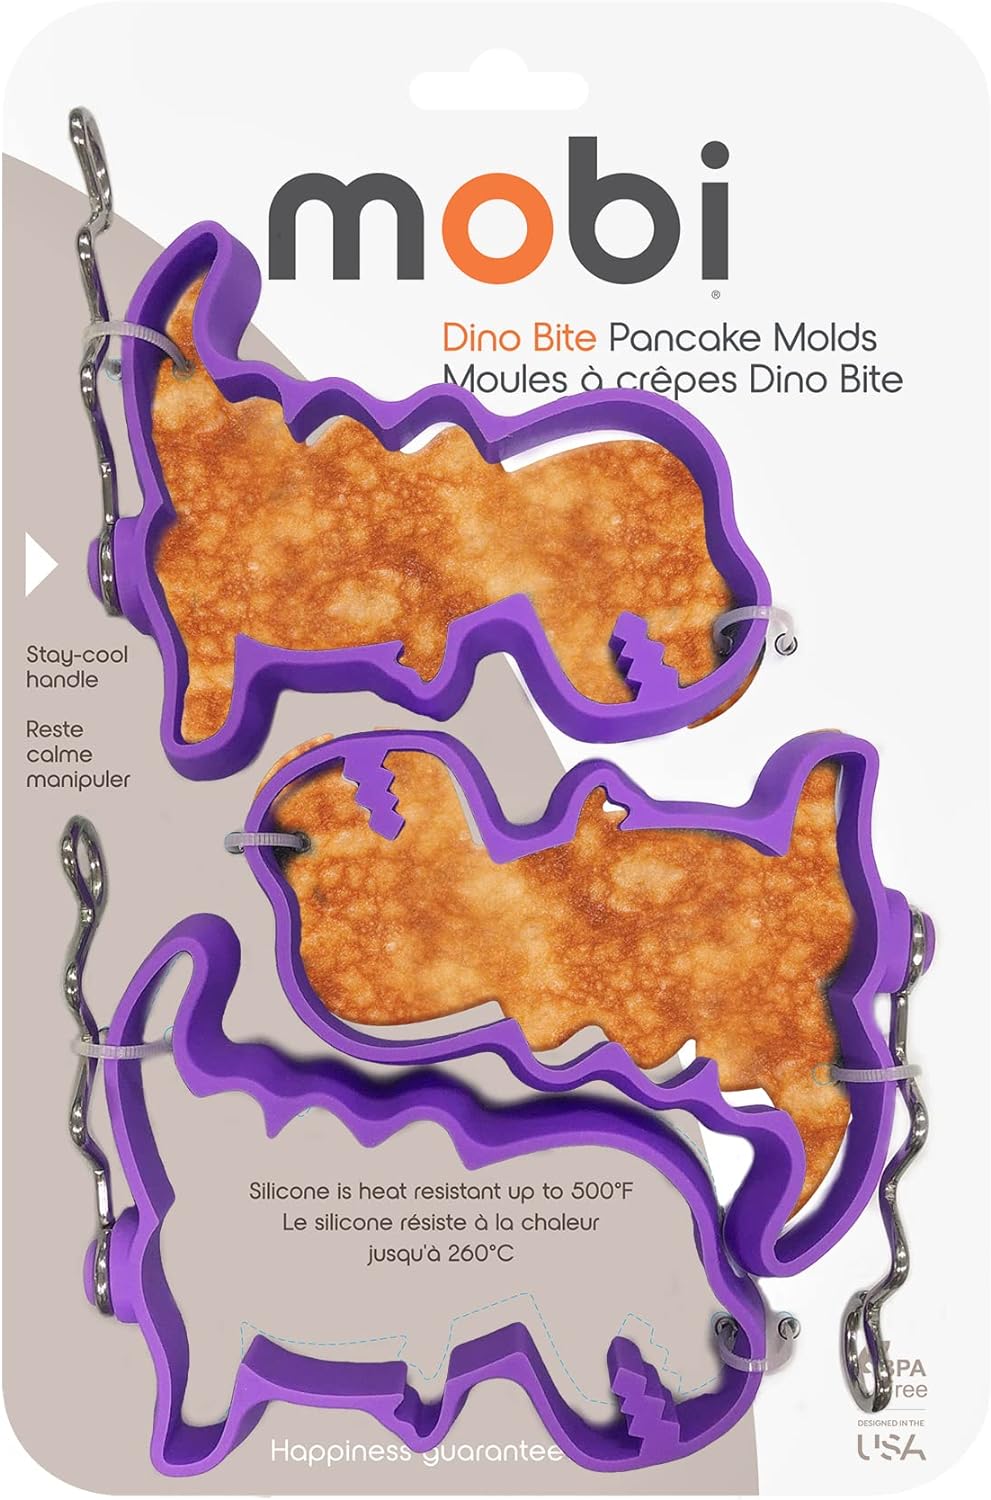 Uique dino-shaped silicone pancake molds by Mobi